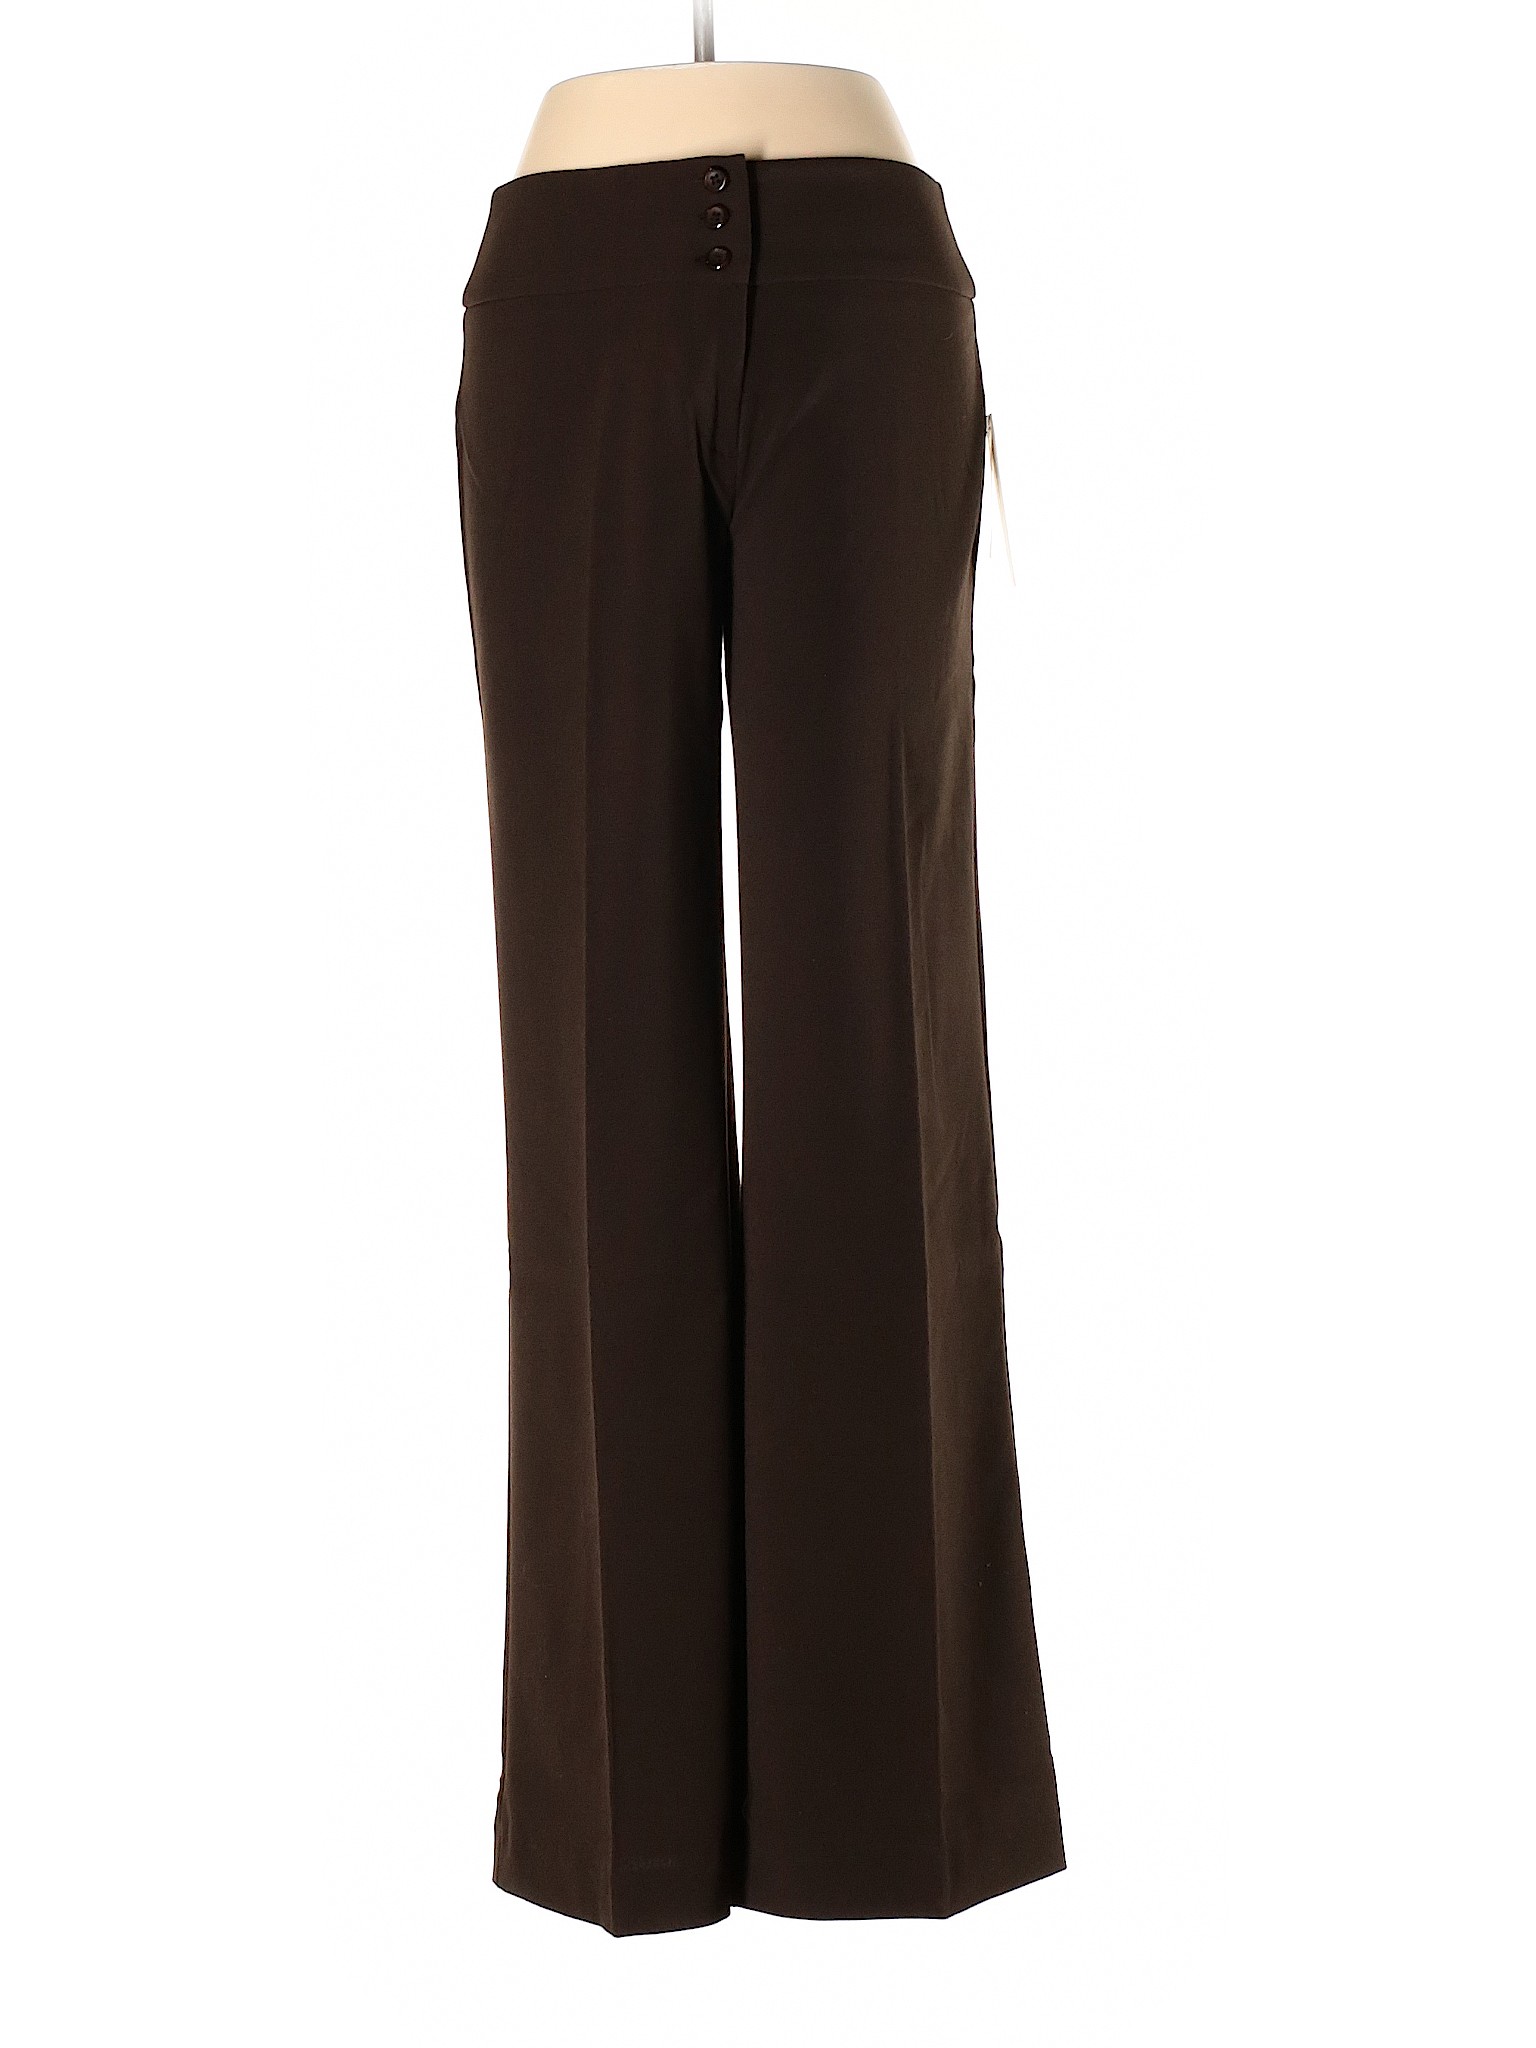 NWT Style&Co Women Brown Casual Pants 2 | eBay